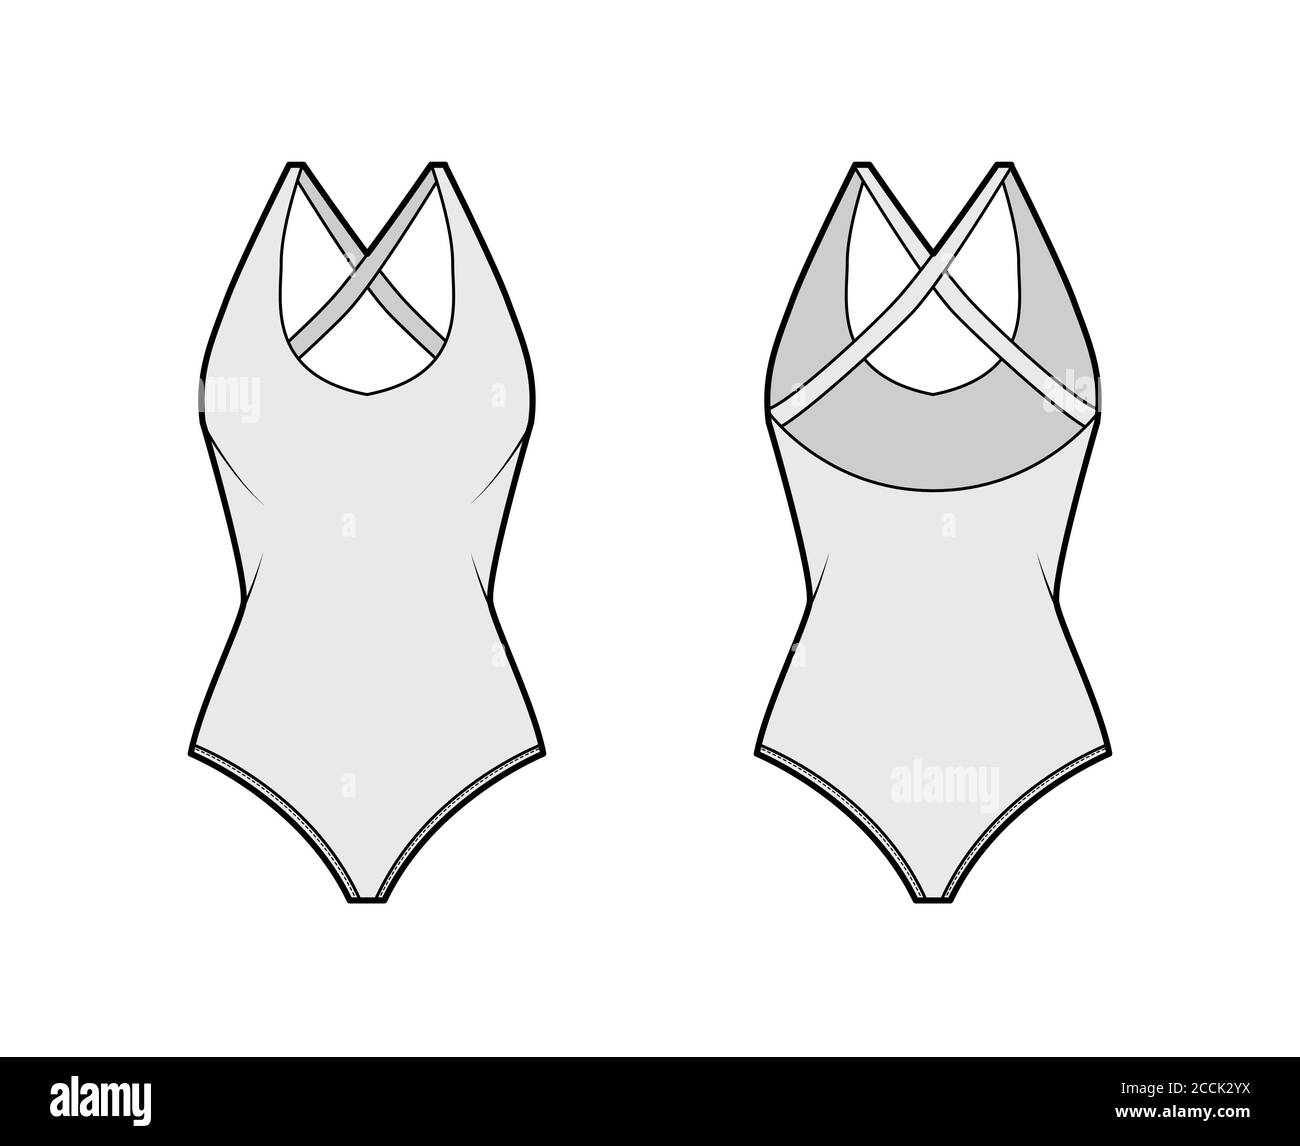 Black one piece swimsuit Stock Vector Images - Alamy